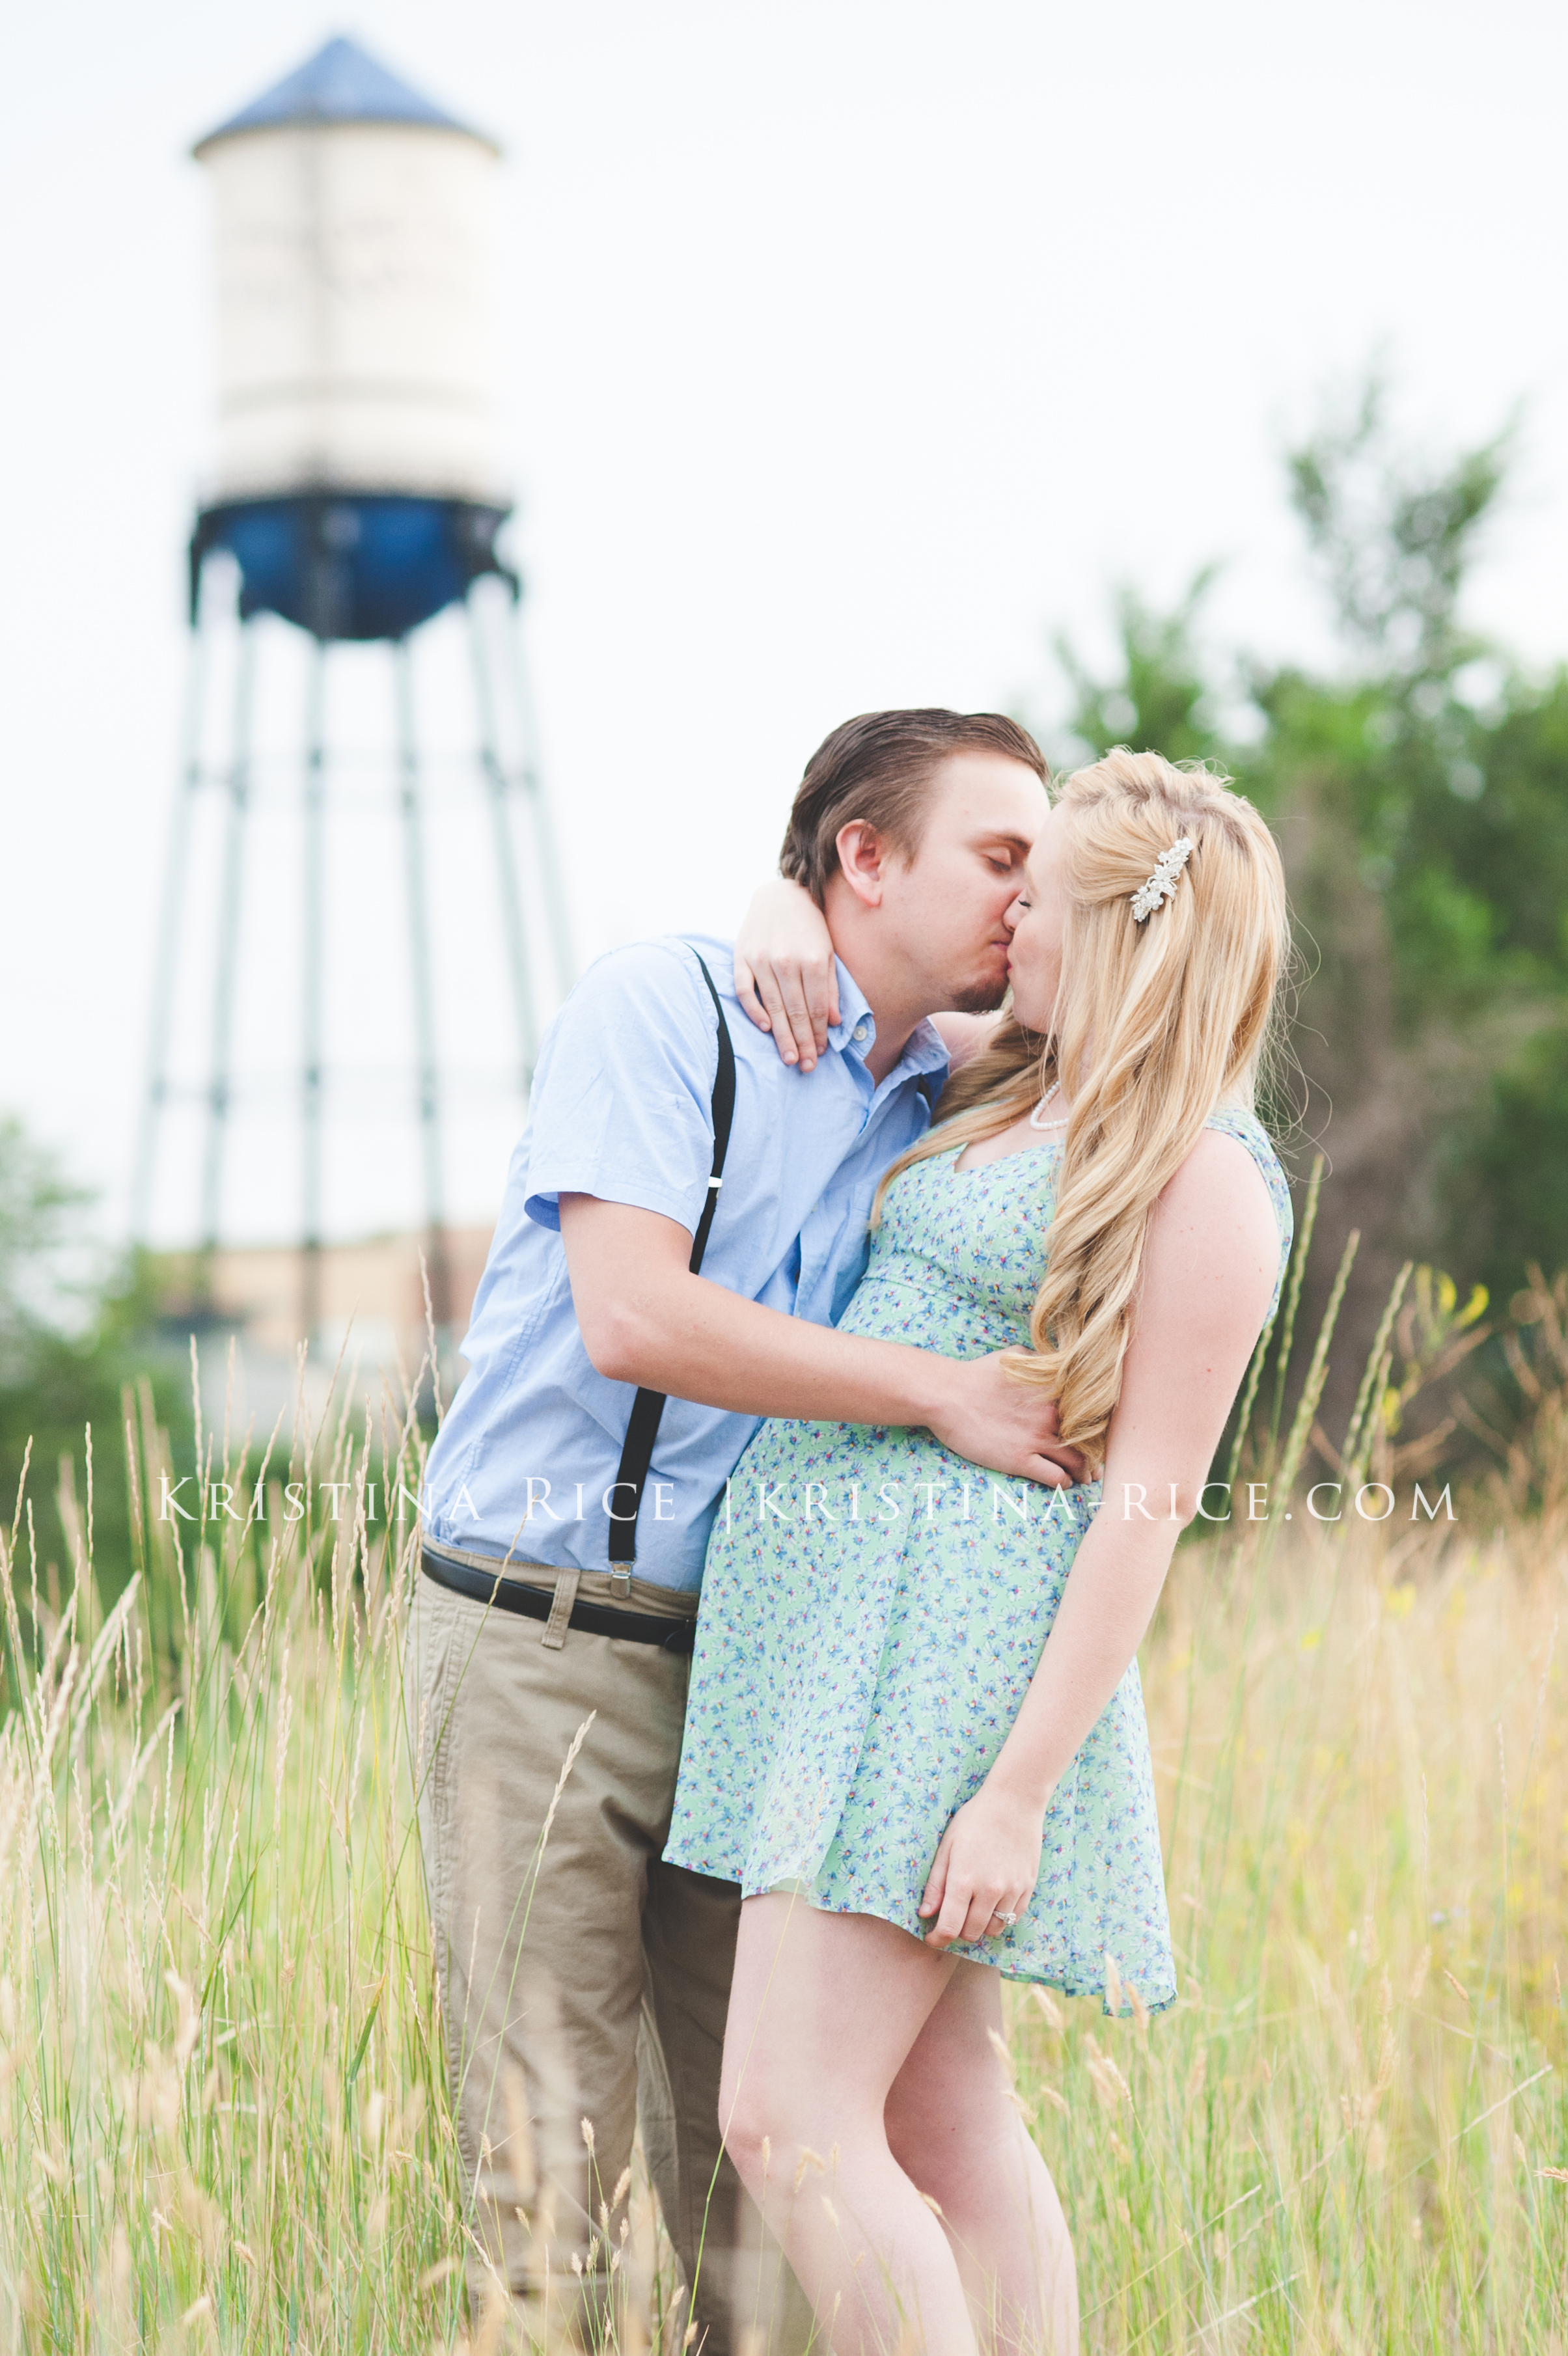 Vintage Great Gatsby Engagement Session | Brittany & Ben